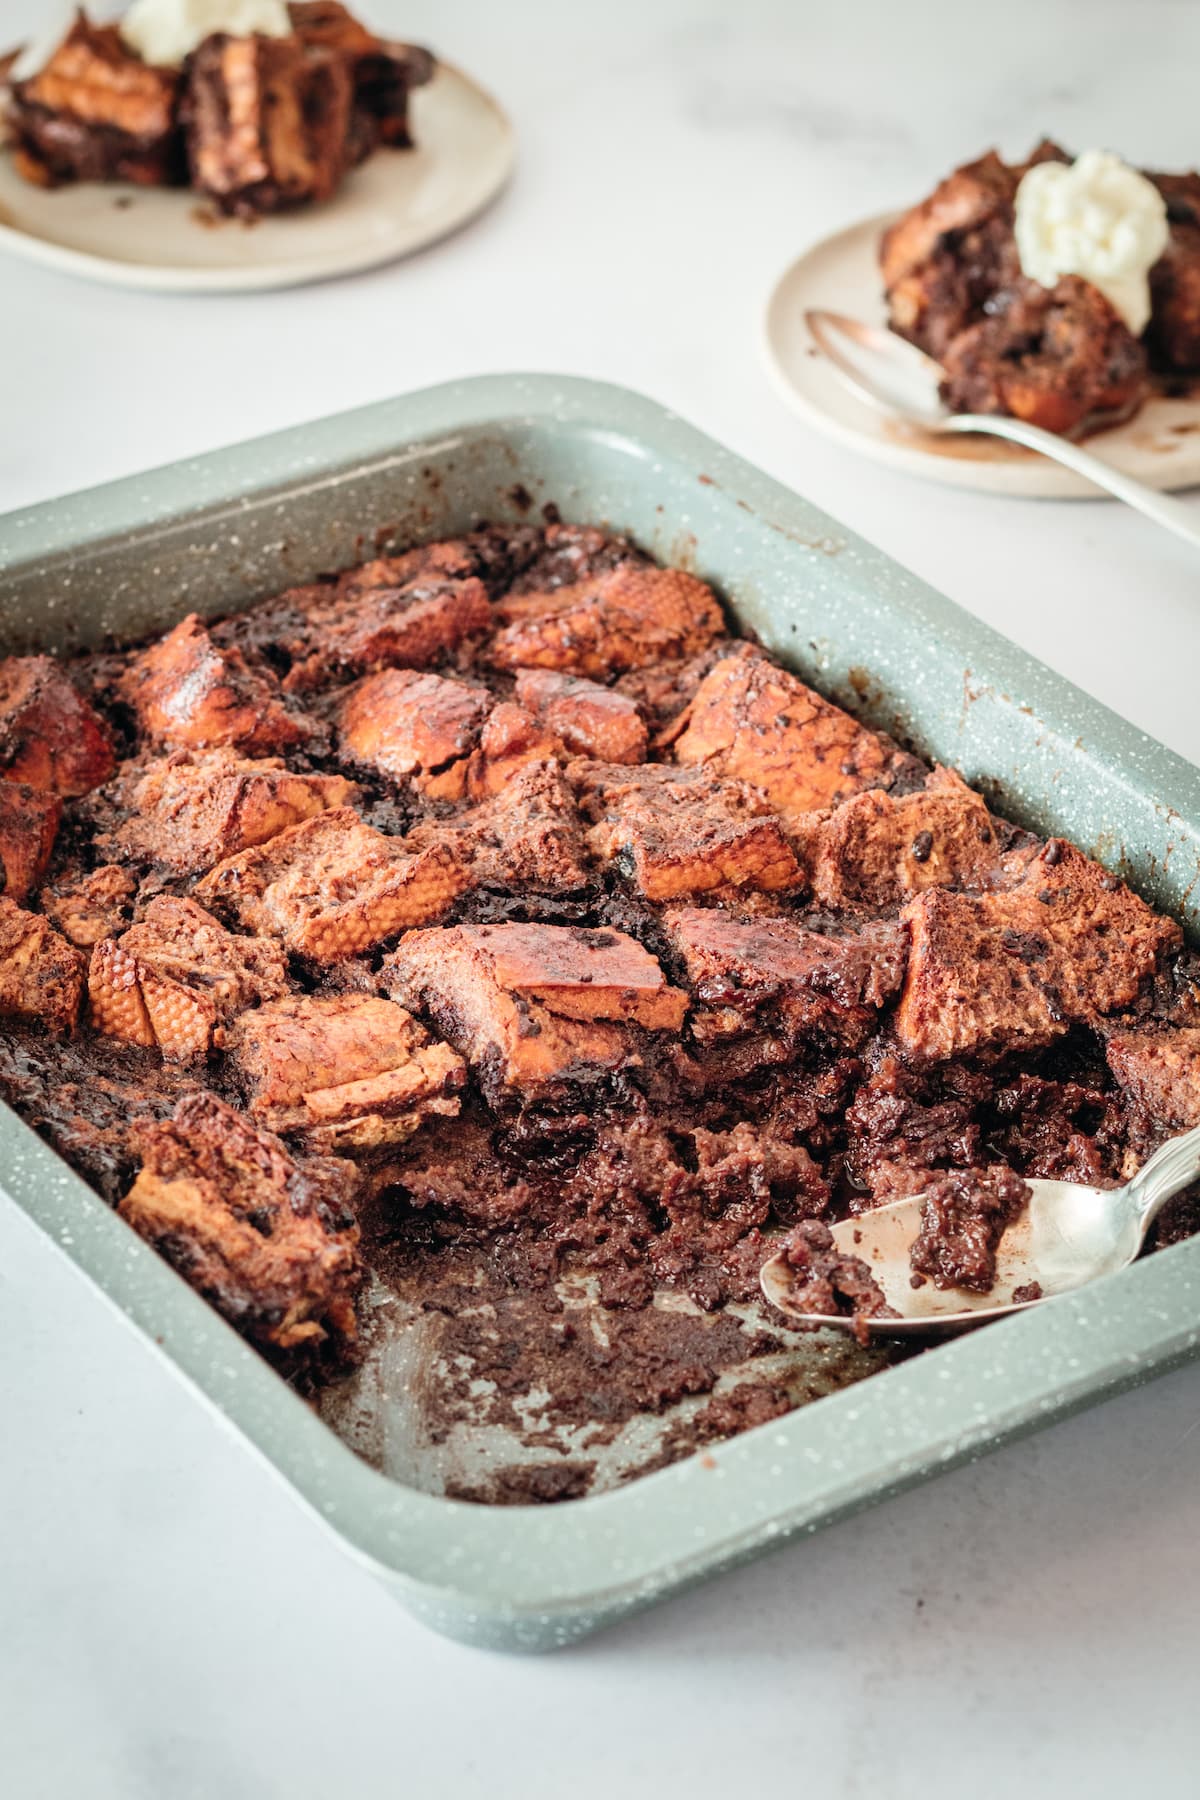 Chocolate Bread Pudding in baking dish with a few servings removed